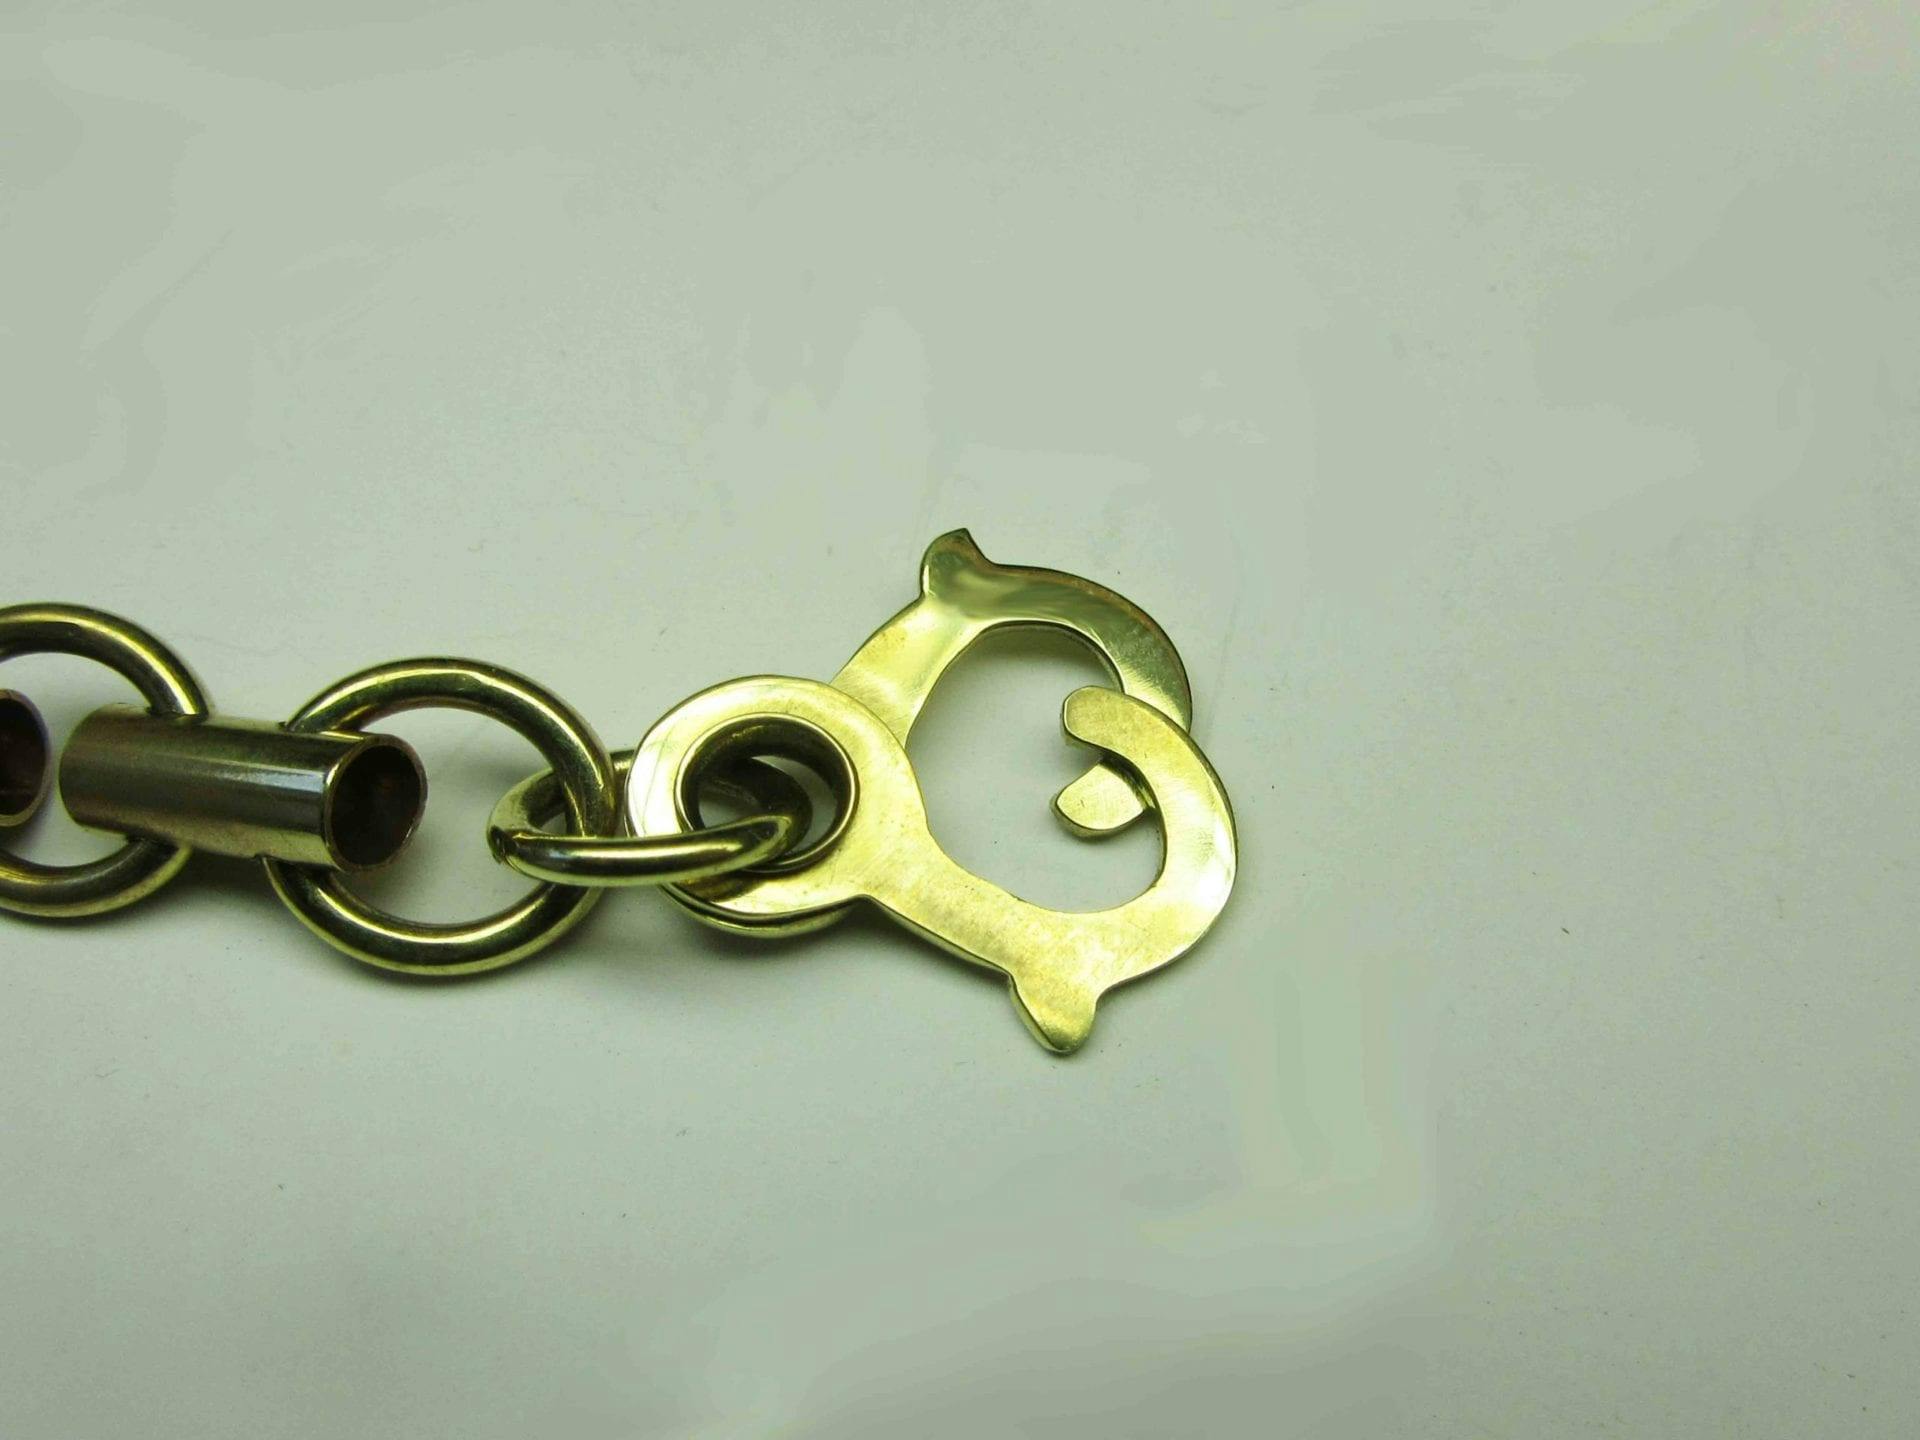 How to Make a Sister Hook Clasp